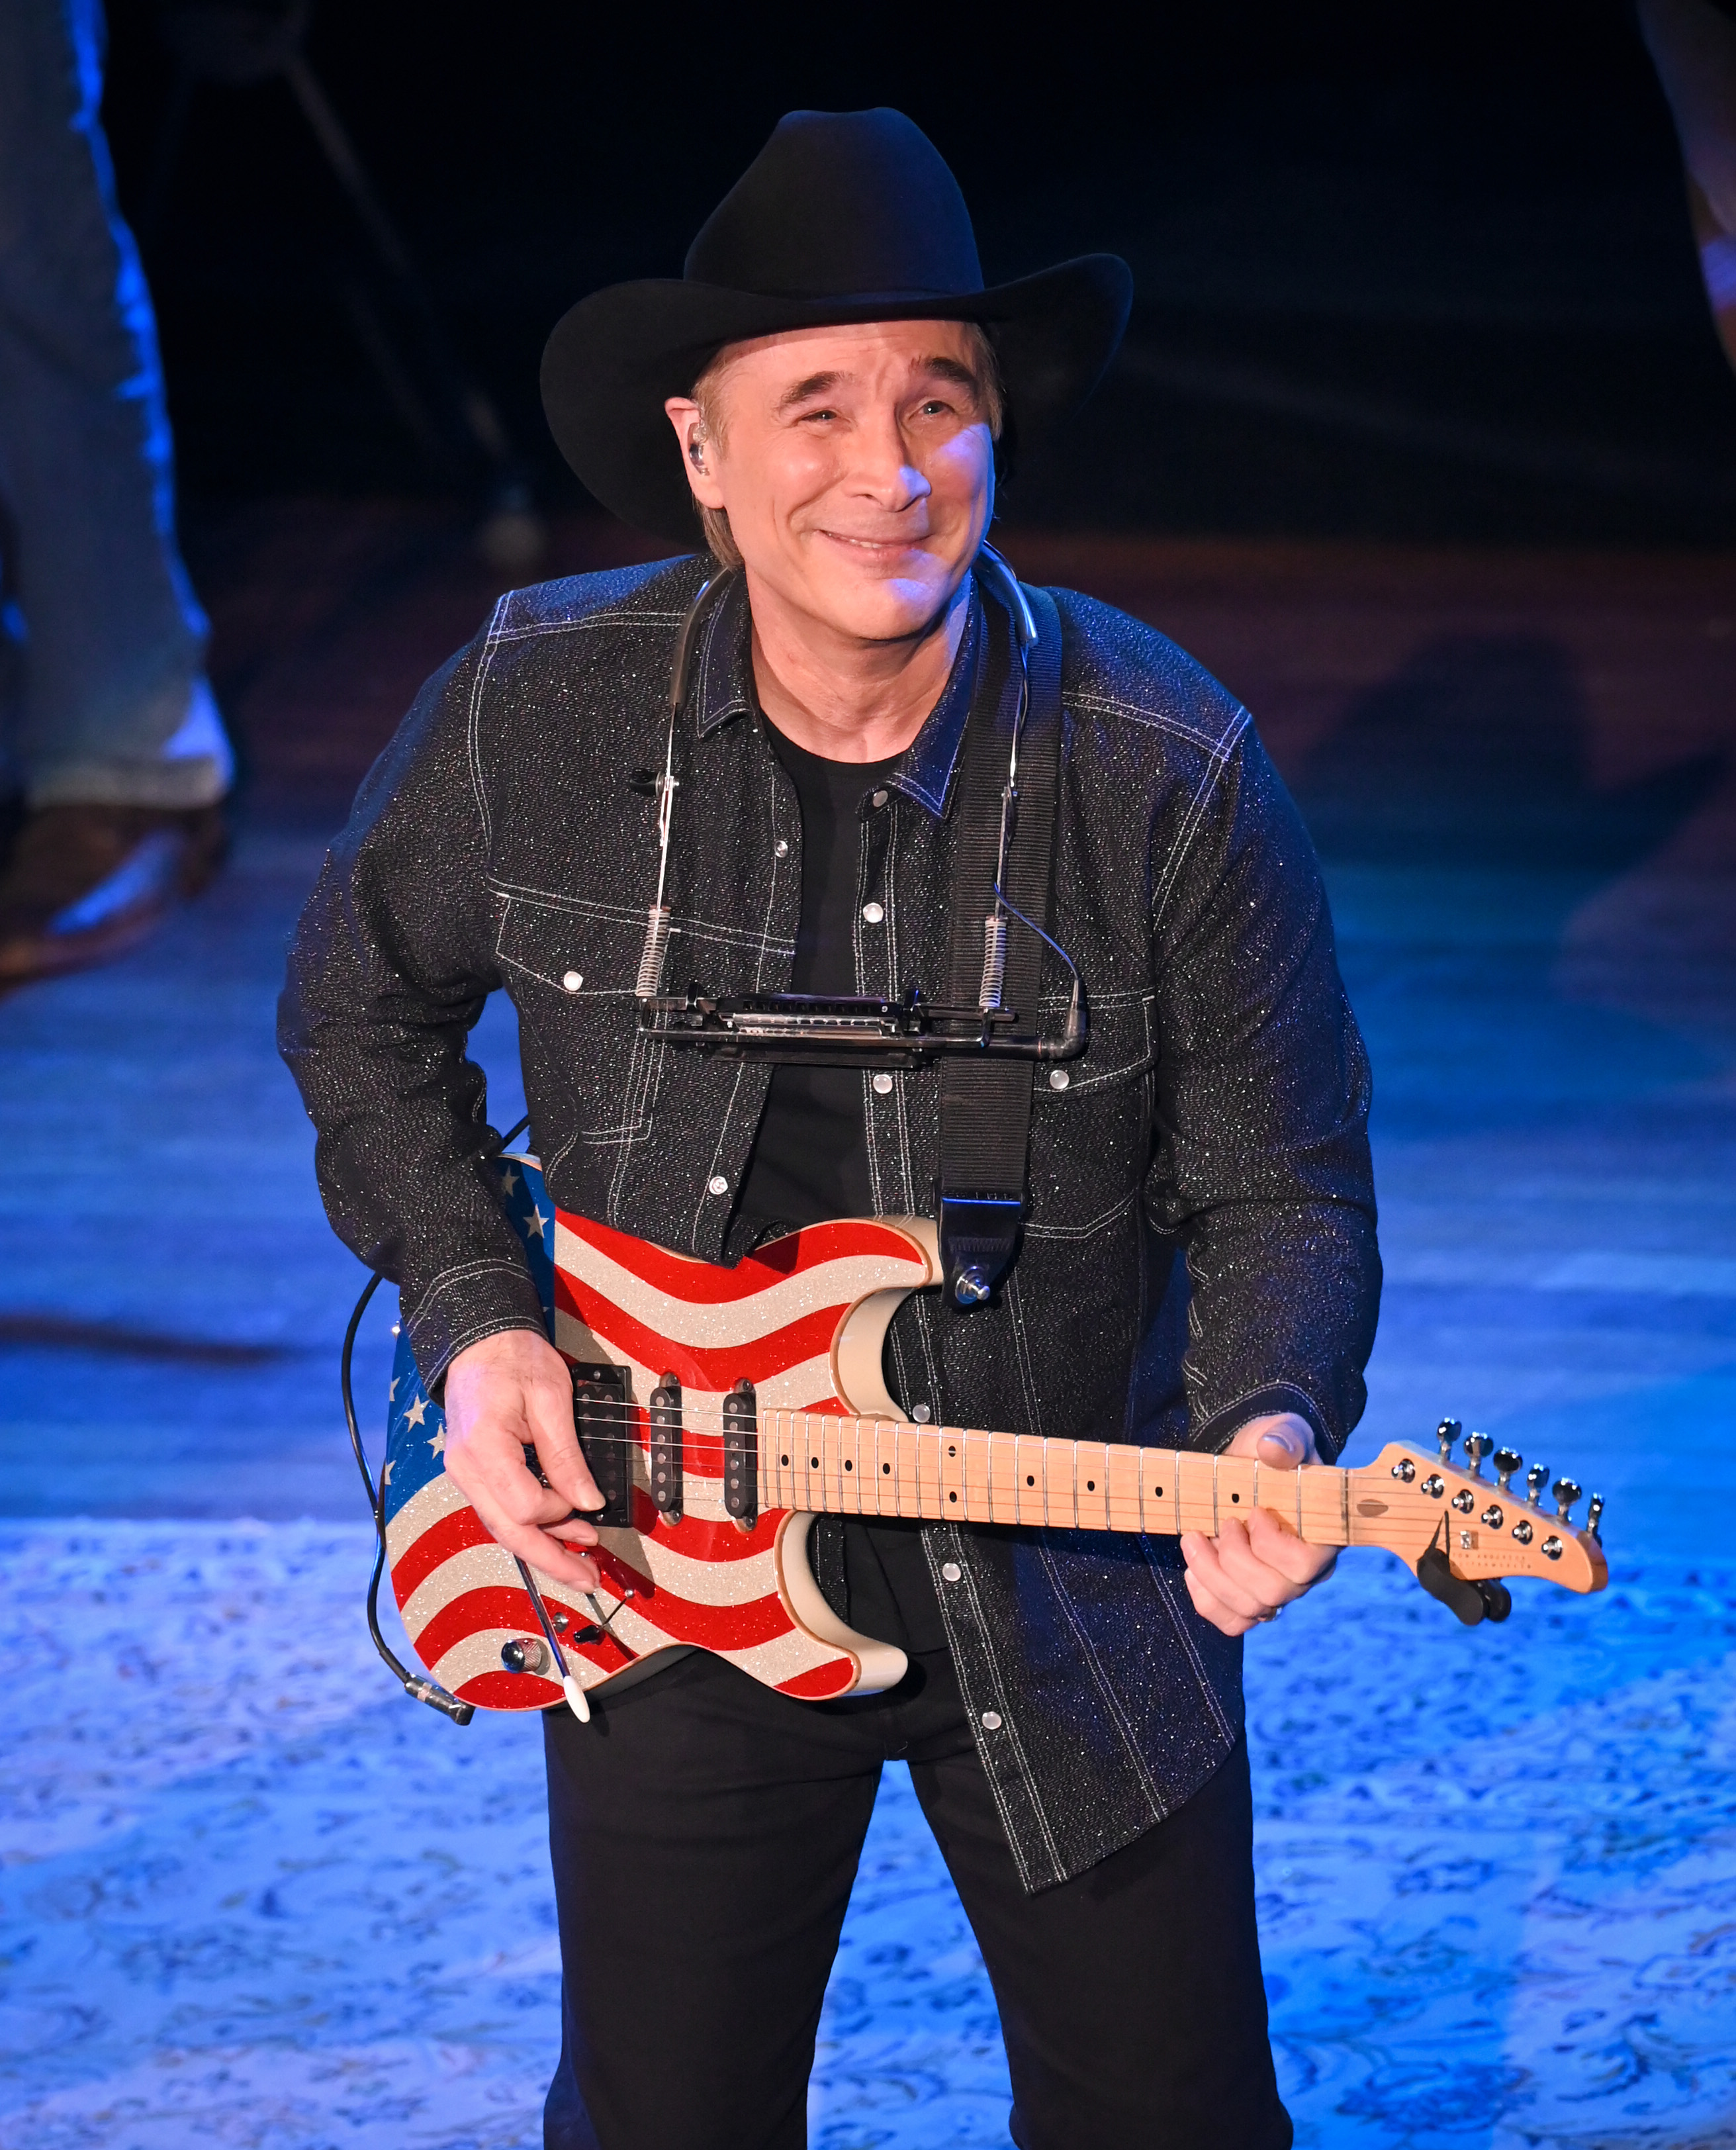 Clint Black performing at the Ryman Auditorium on December 02, 2020 in Nashville, Tennessee | Source: Getty Images